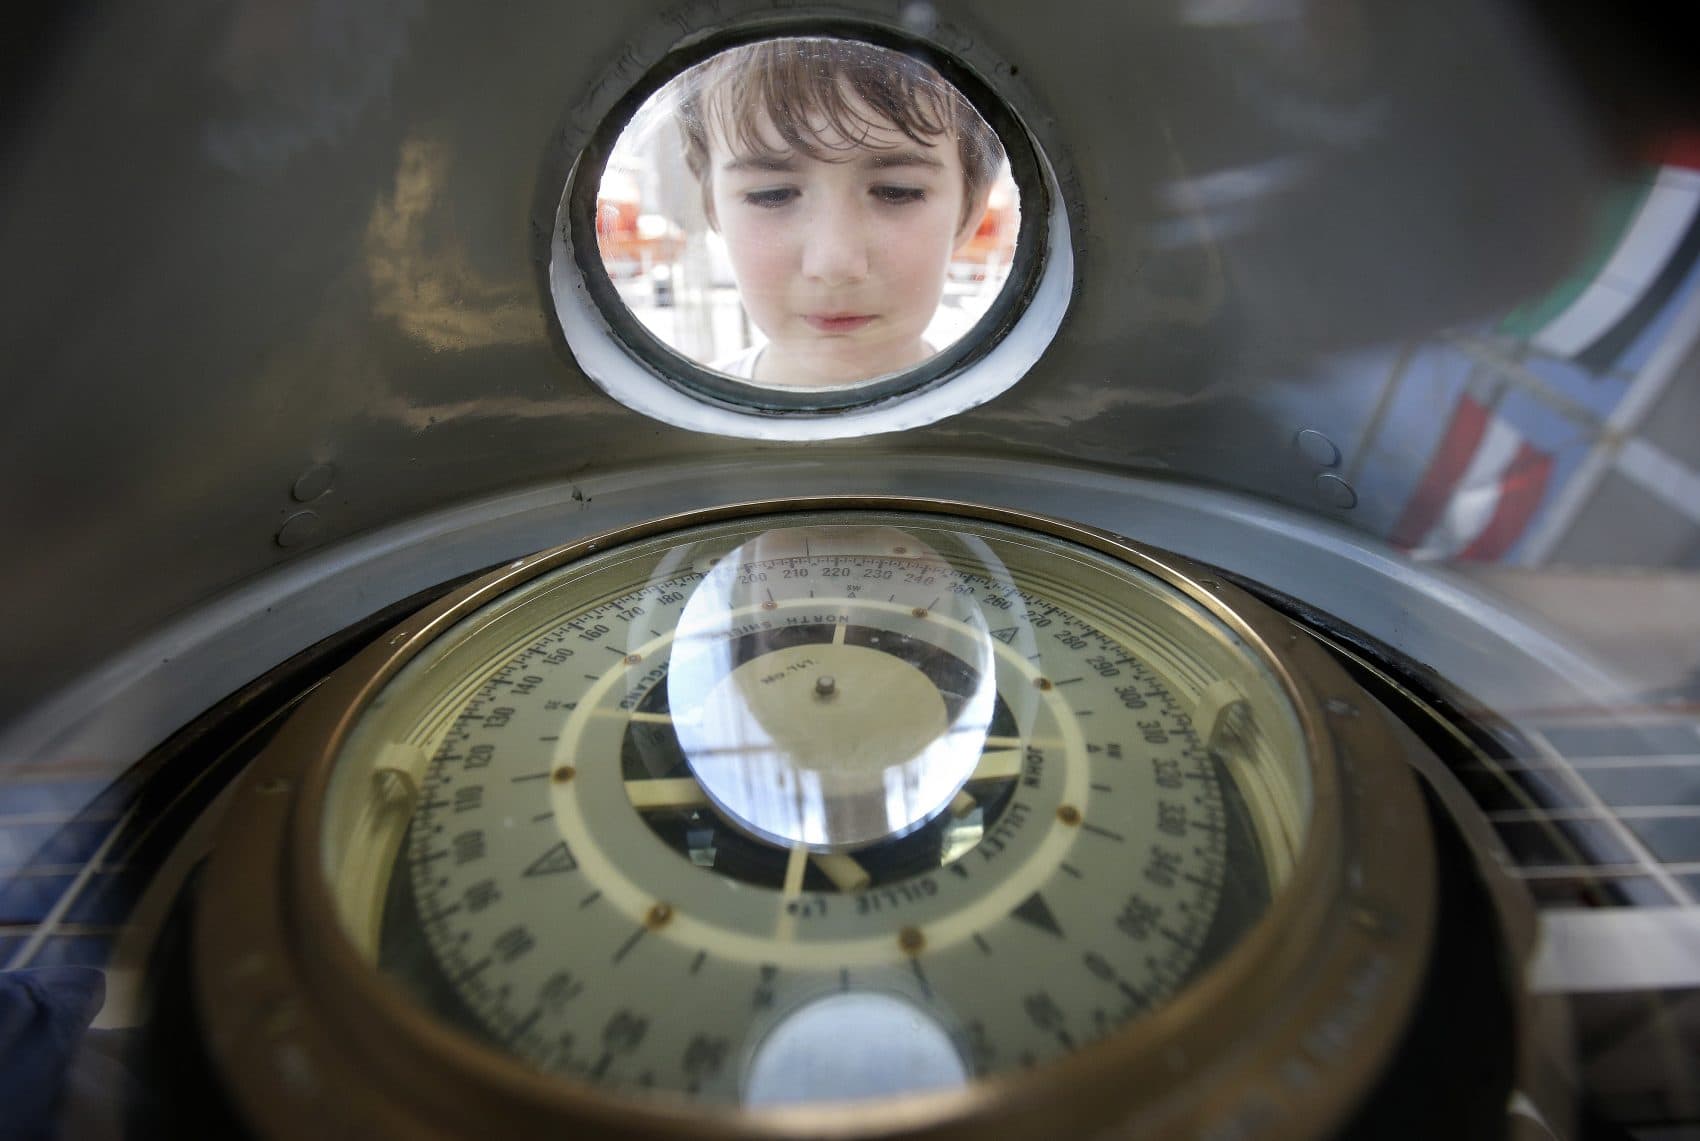 Sean Sullivan, 8, of Wellesley, Mass., examines a compass aboard the Peruvian Navy tall ship Union, which was open to the public to visitors on Sunday. (Steven Senne/AP)